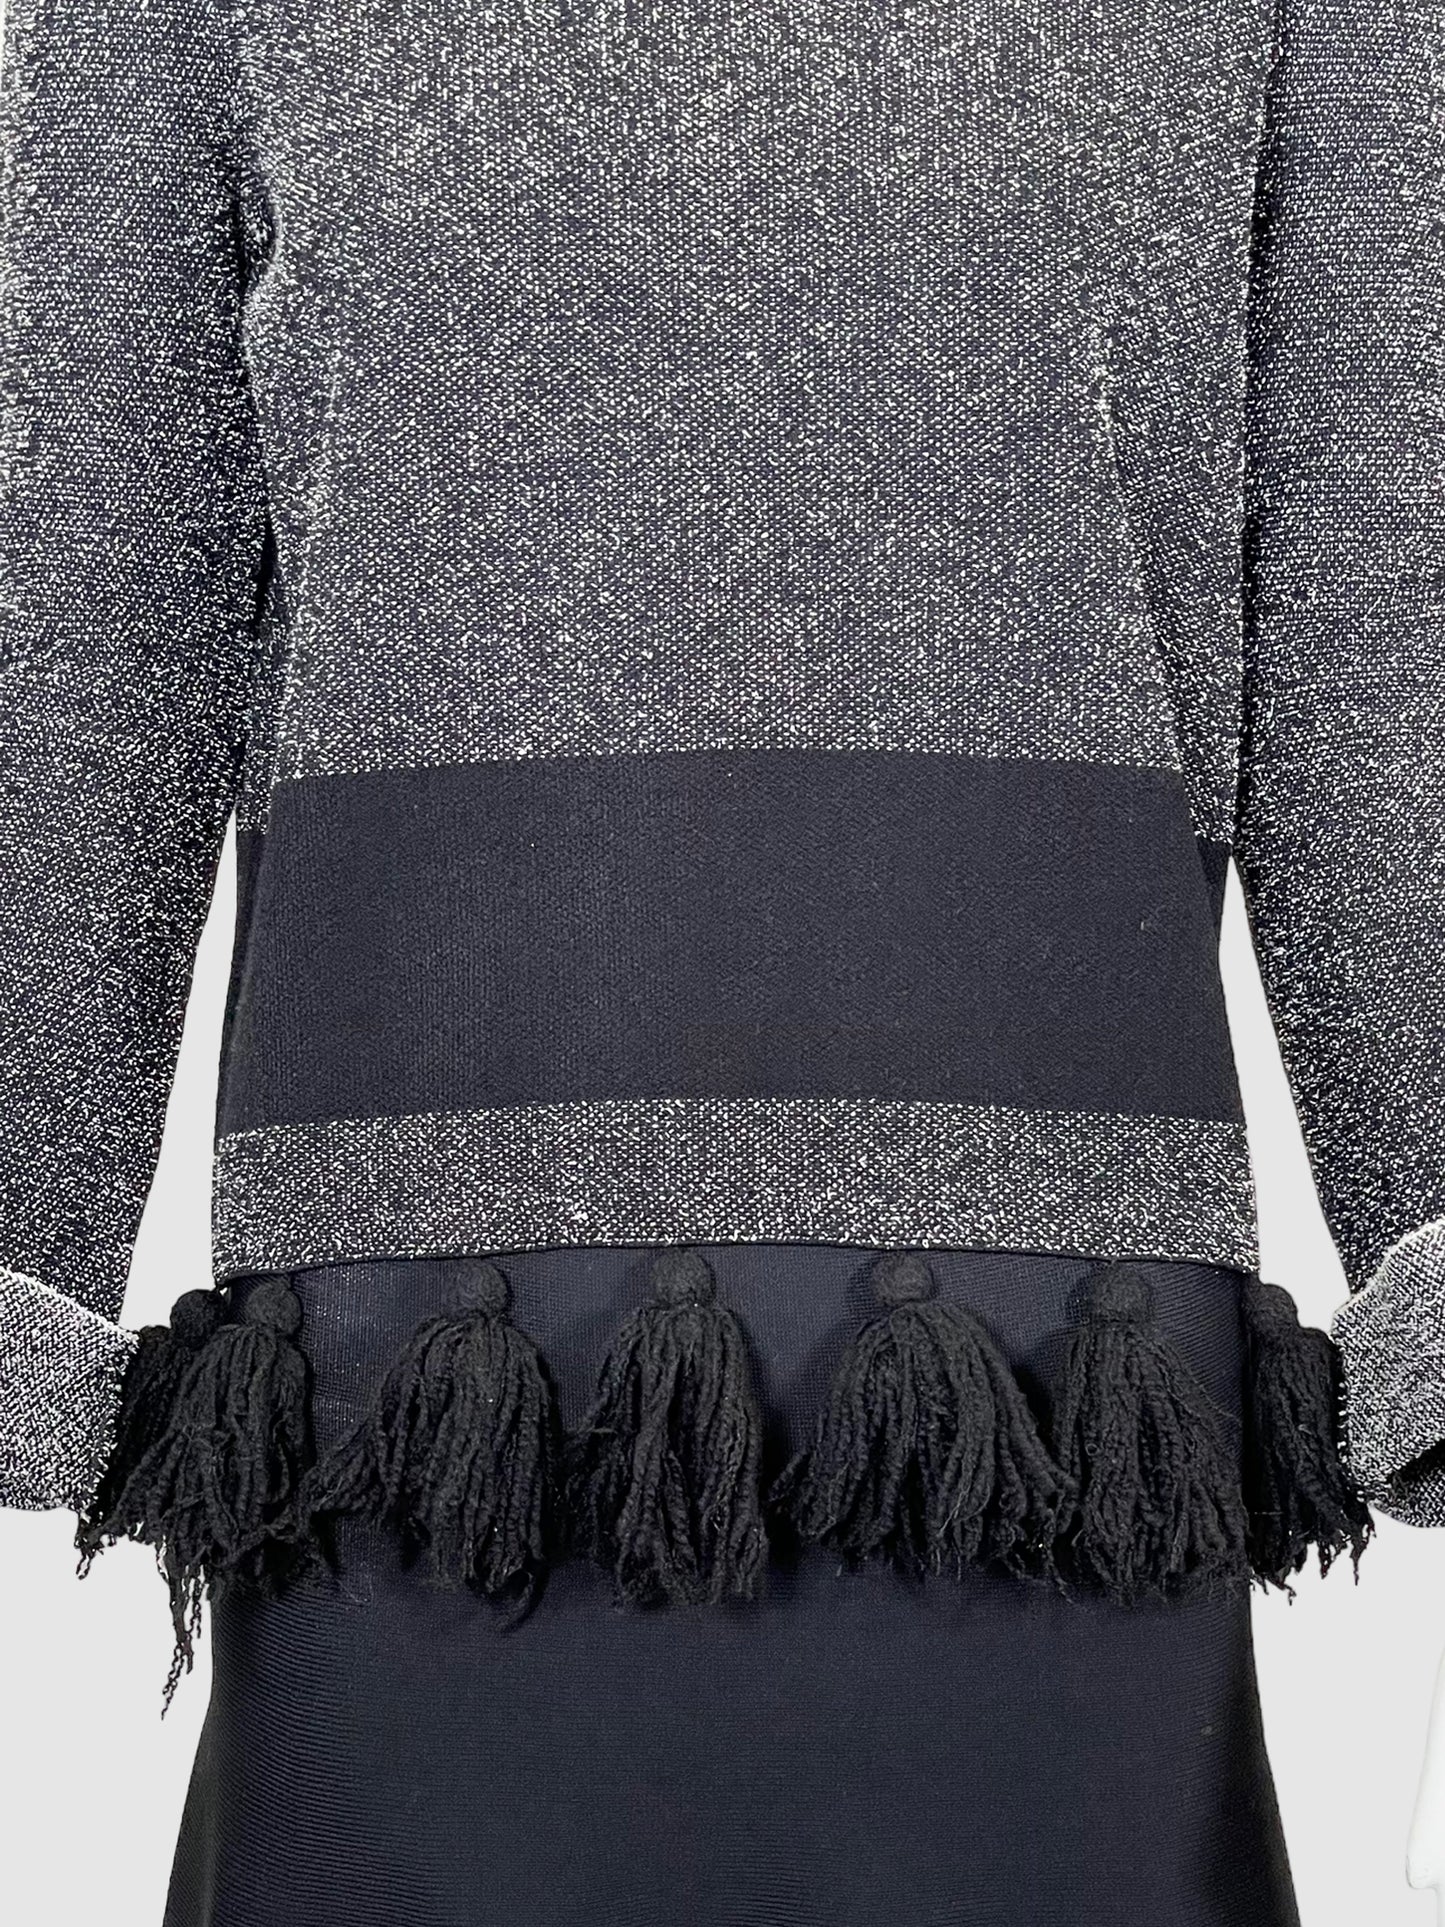 Crew Neck Sweater with Tassels - Size S